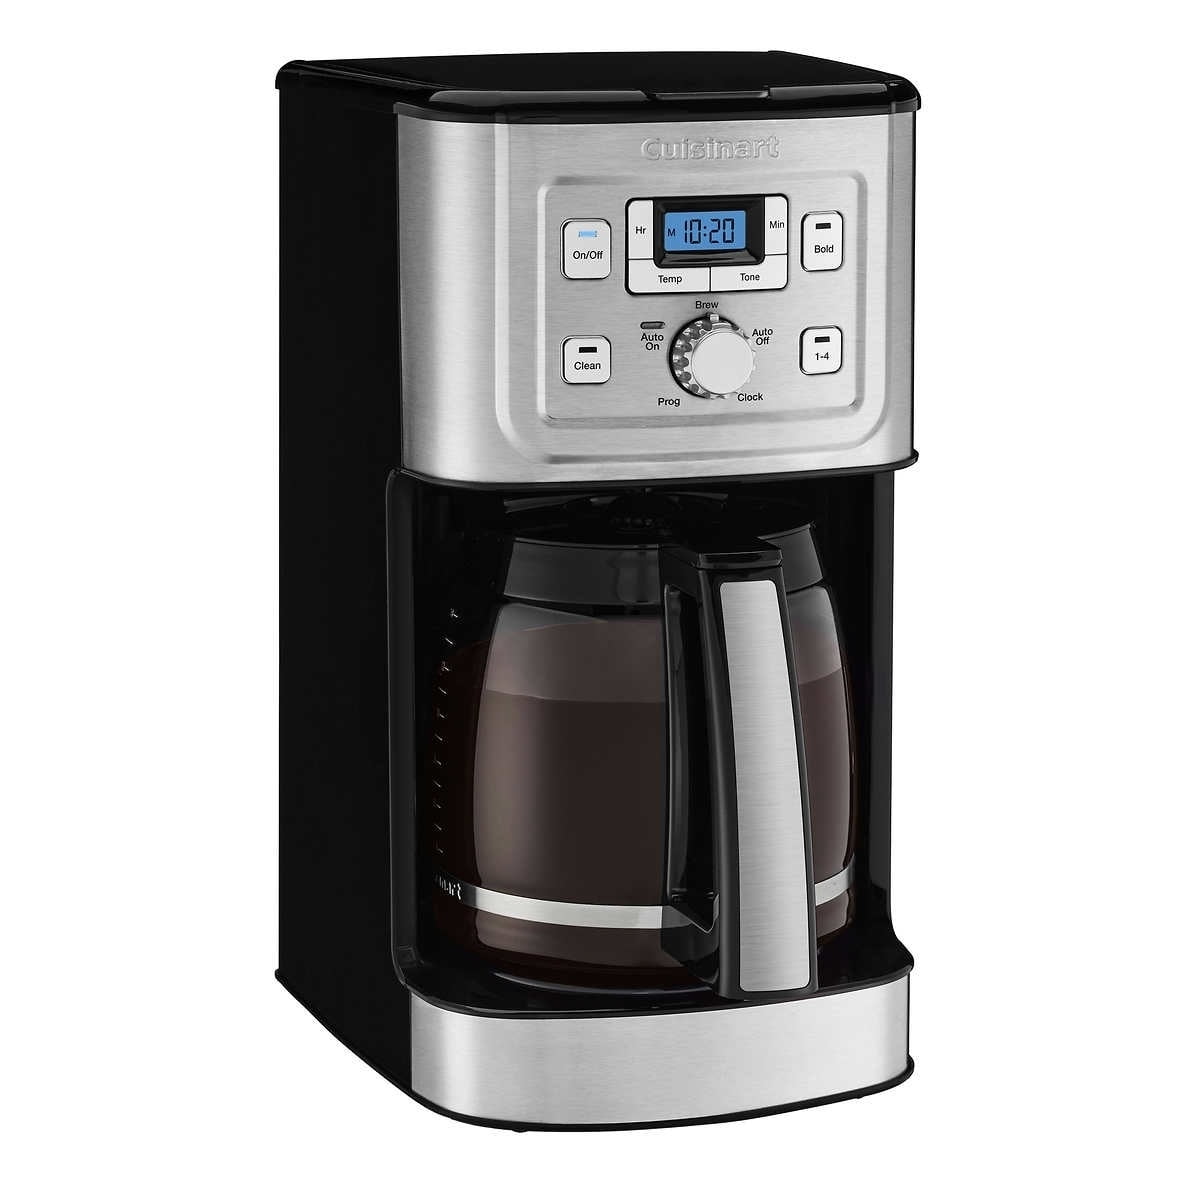 Shop Coffeemakers now!, 12-Cup Programmable BCM1410W